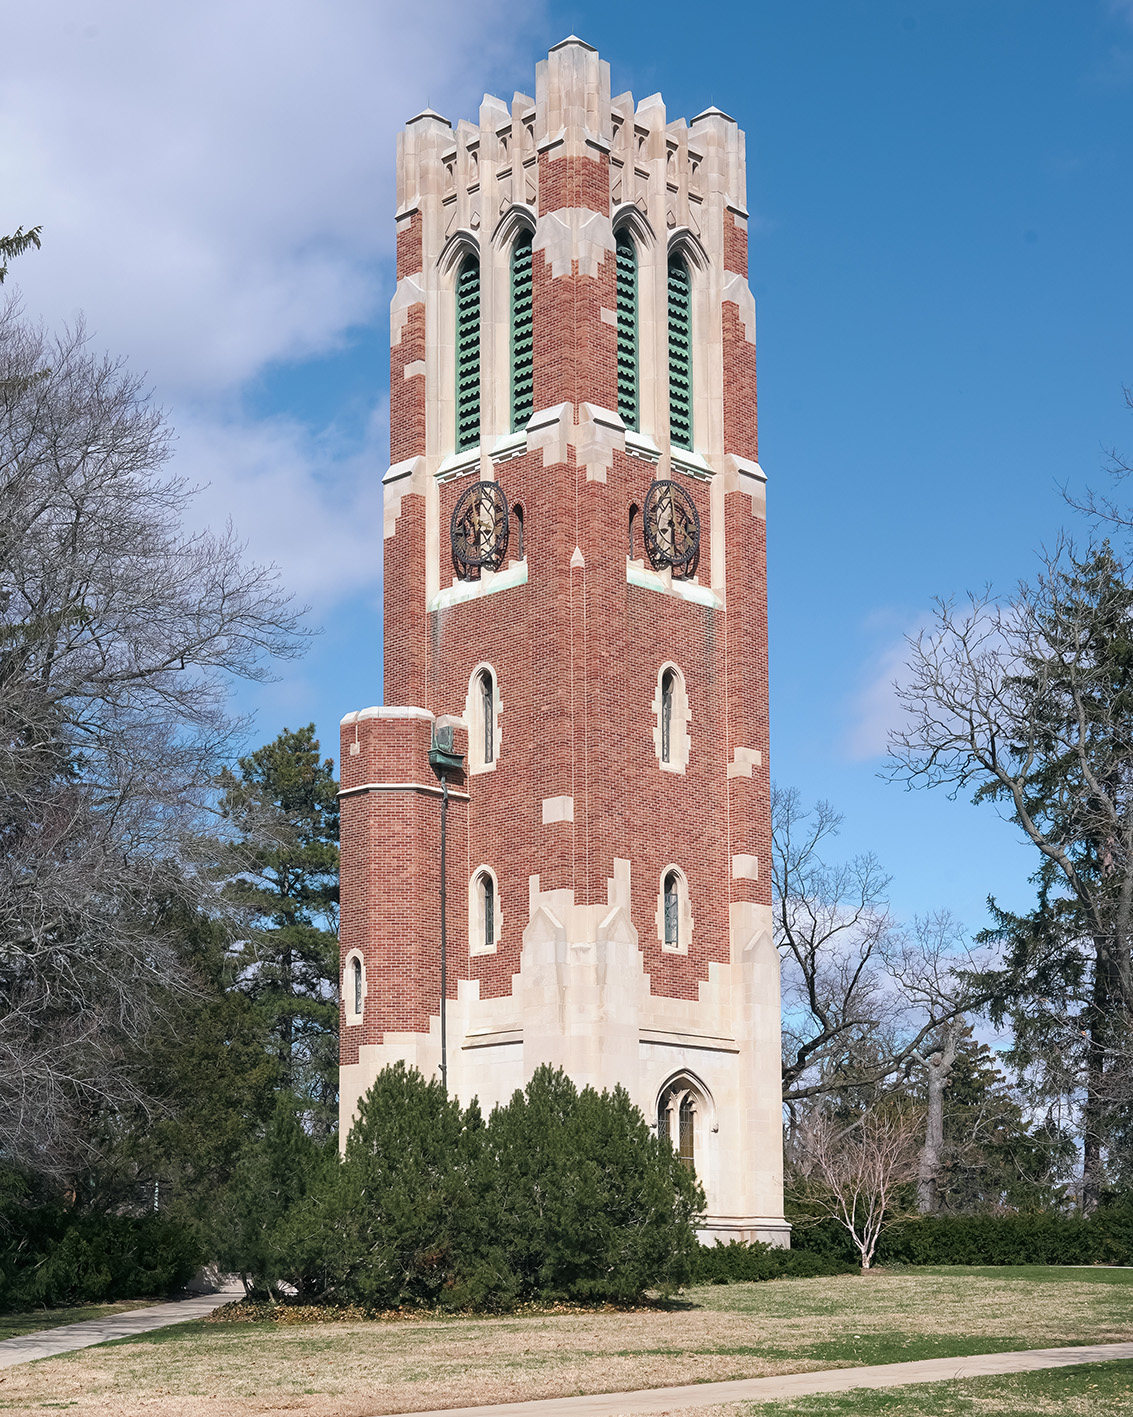 Beaumont Tower in early spring on a sunny day